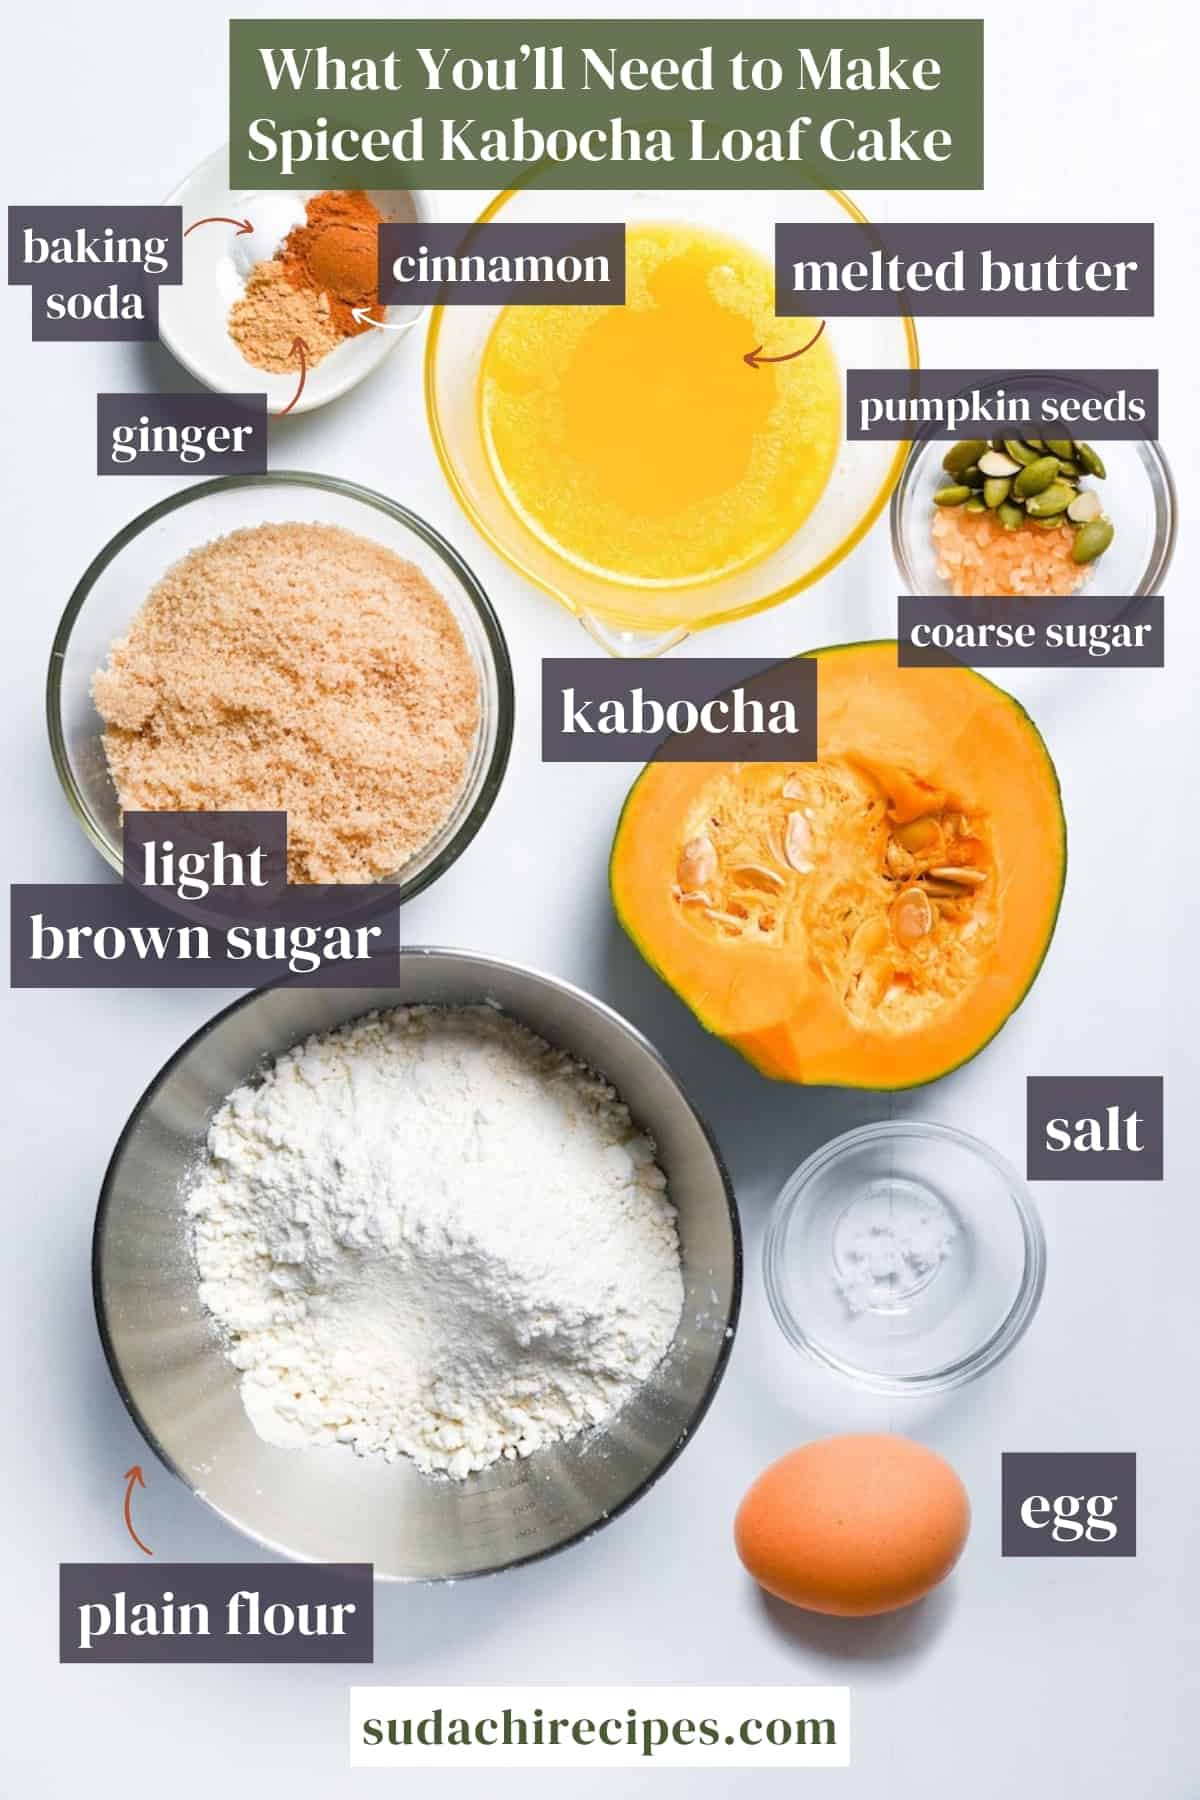 Spiced kabocha loaf ingredients on a white background with labels